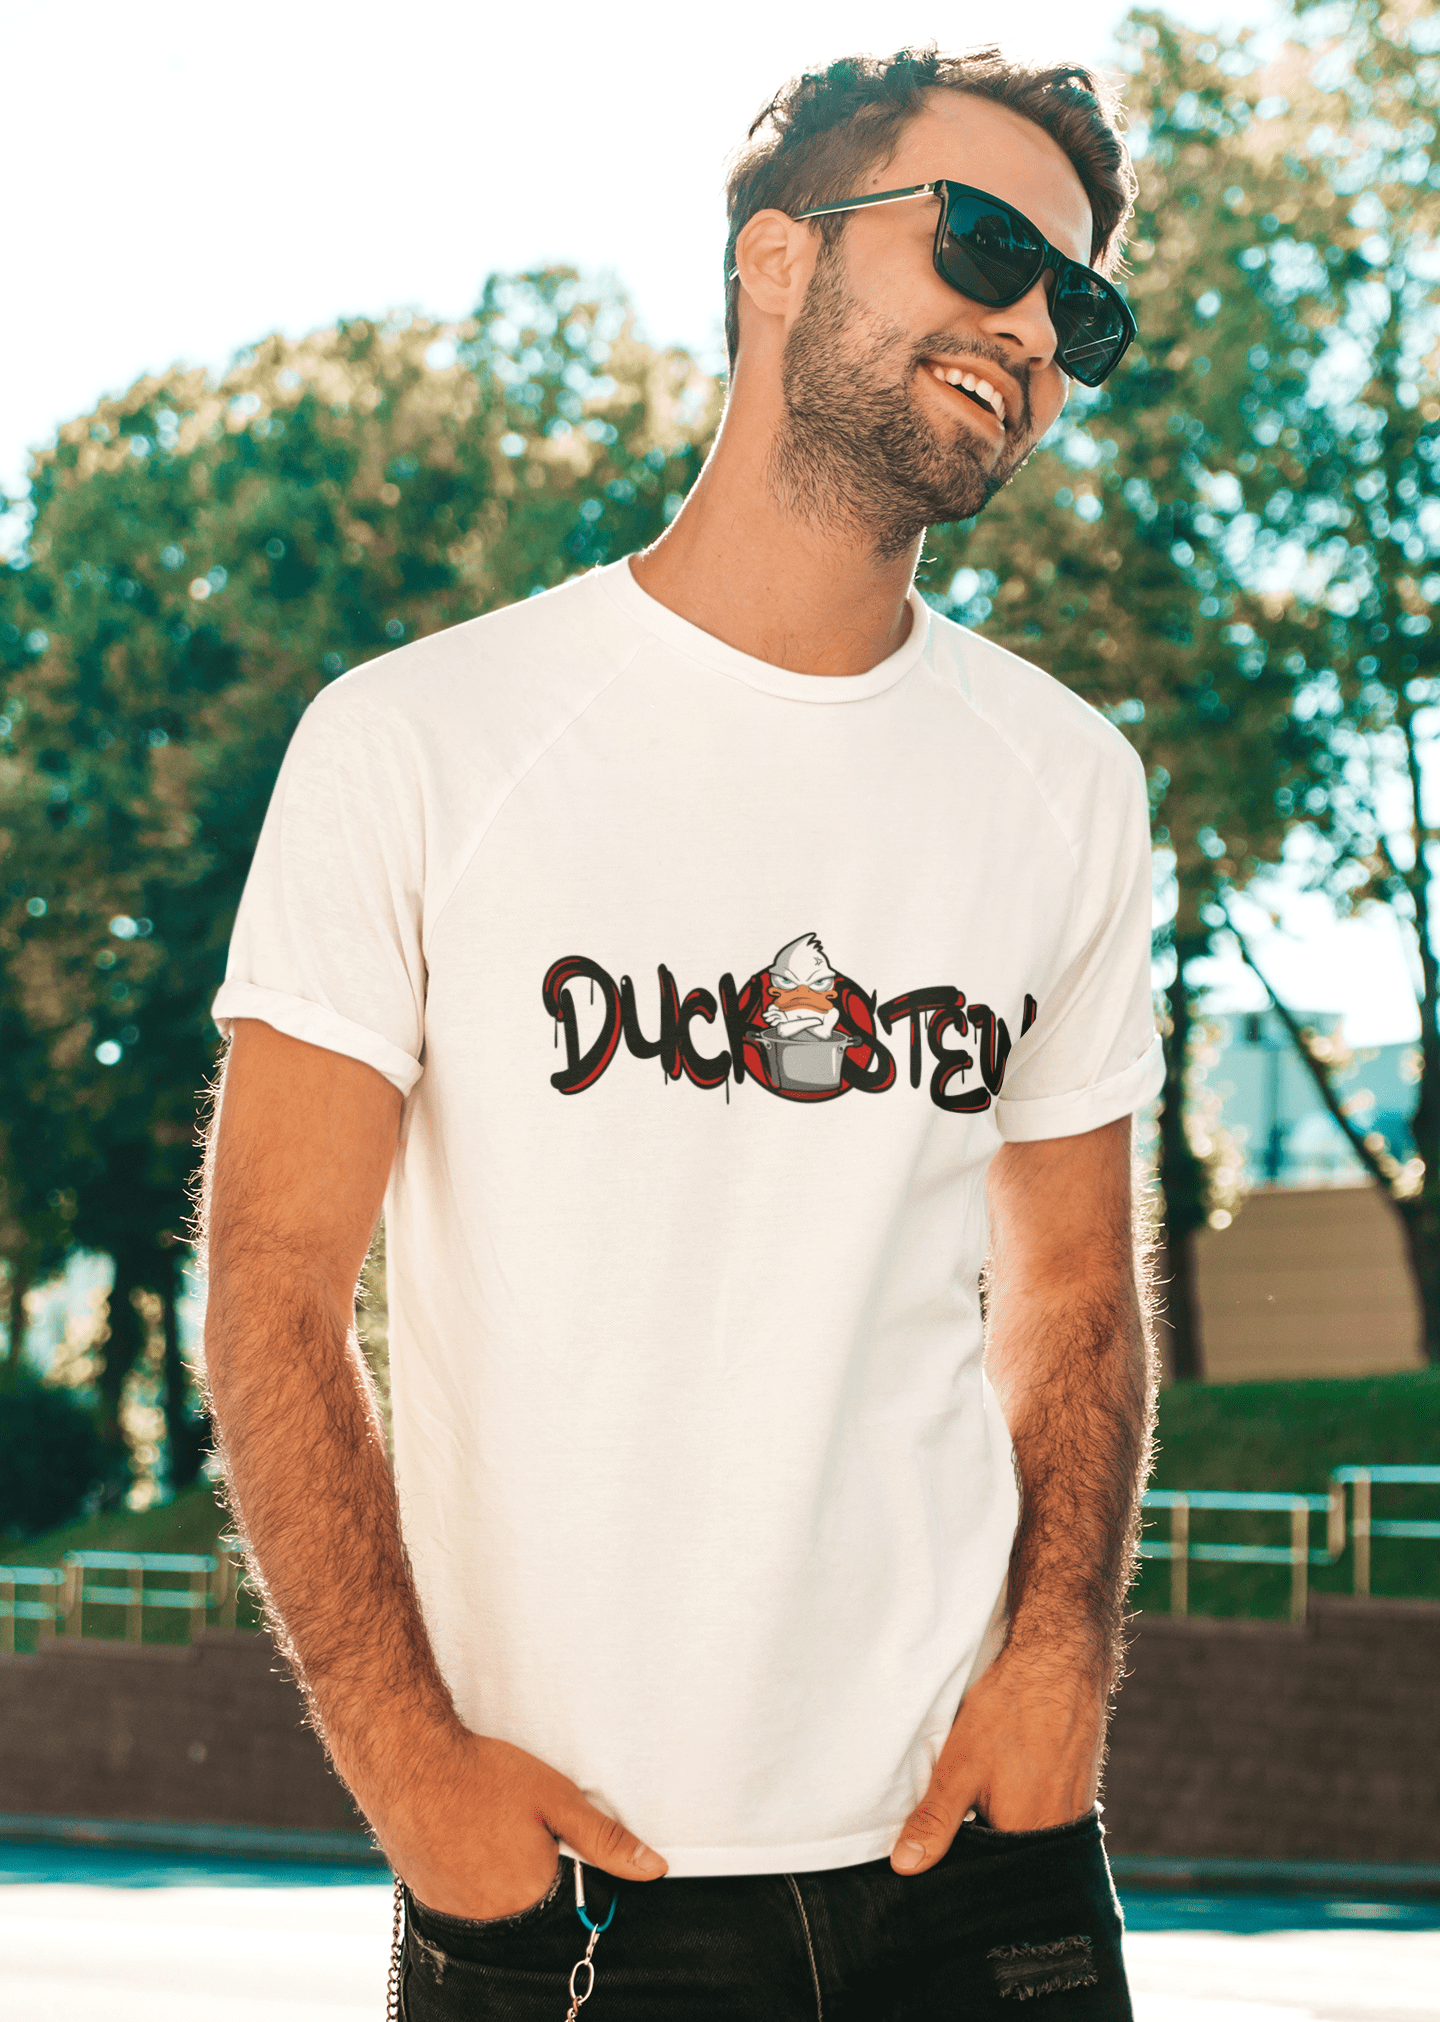 This is a guy with white Tshirt with Duckstew 